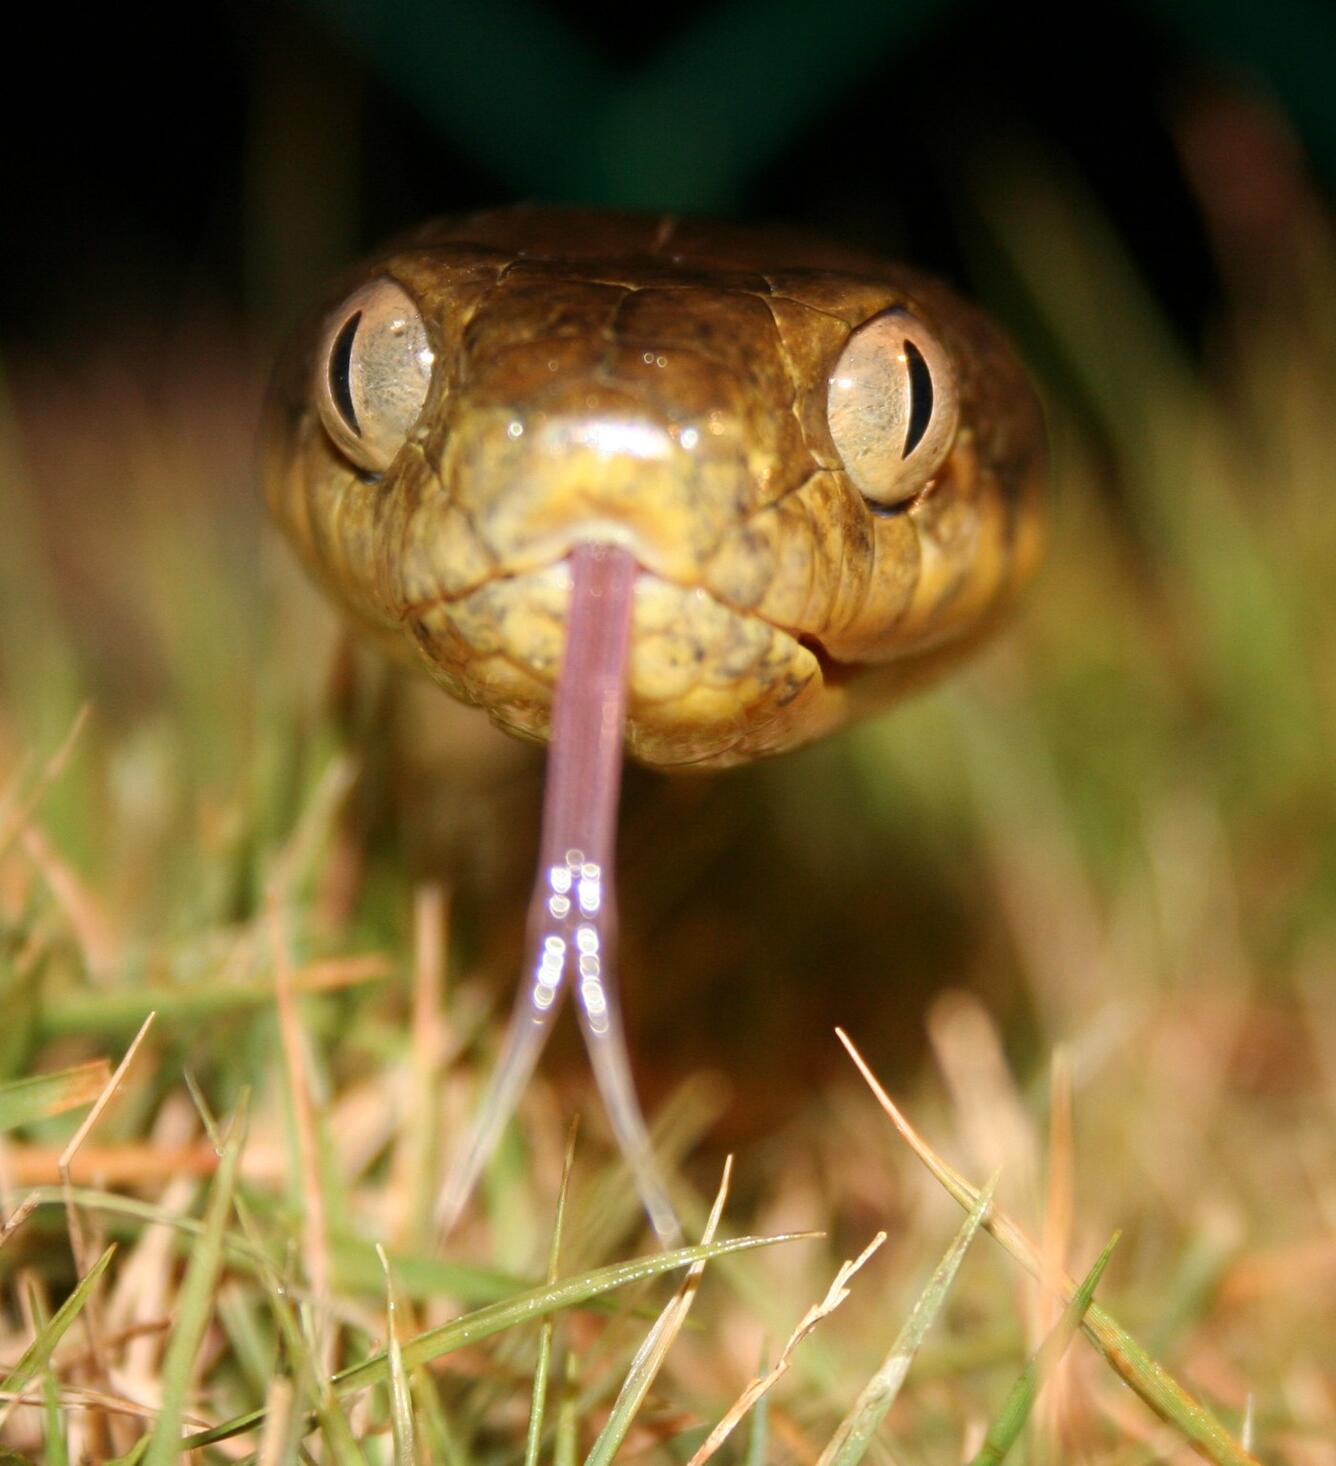 Up close view of Brown treesnake in grass